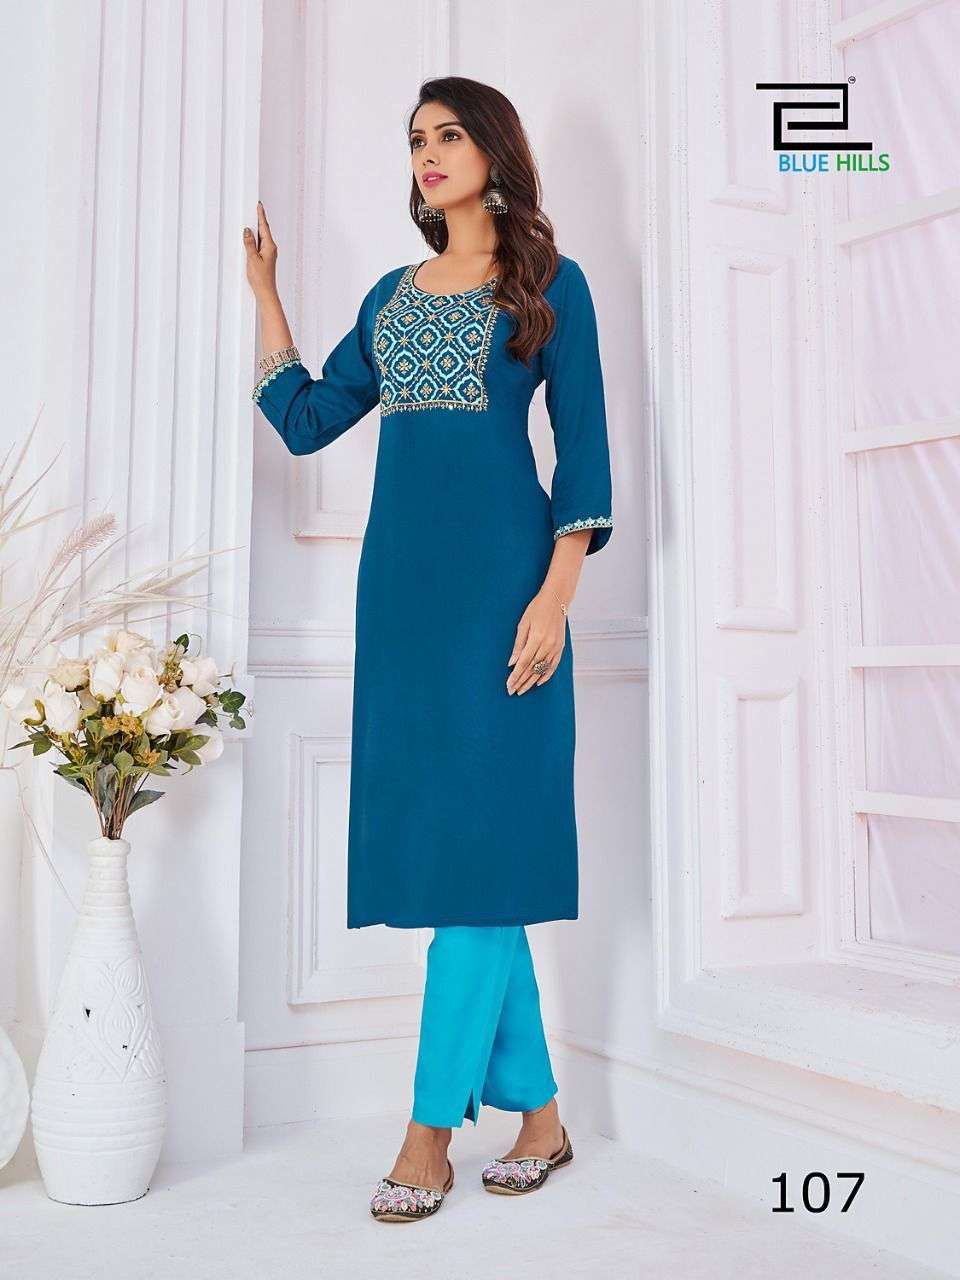 COLLEGE GIRL BY ASIWHOLESALE 8521-A TO 8521-F SERIES RAYON HANDWORK KURTIS